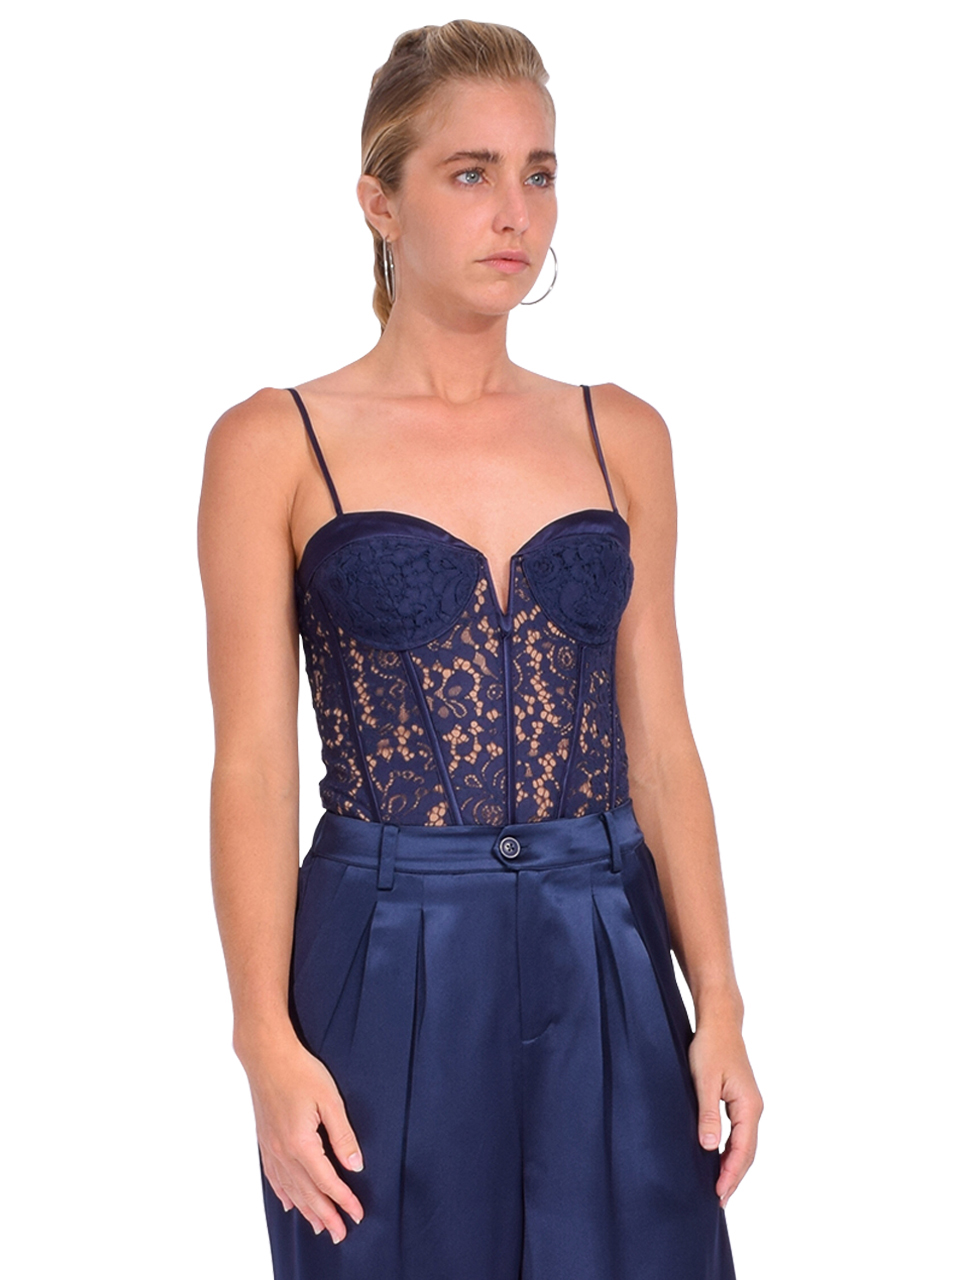 CAMI NYC Anne Corded Lace Bodysuit in Storm Side View 